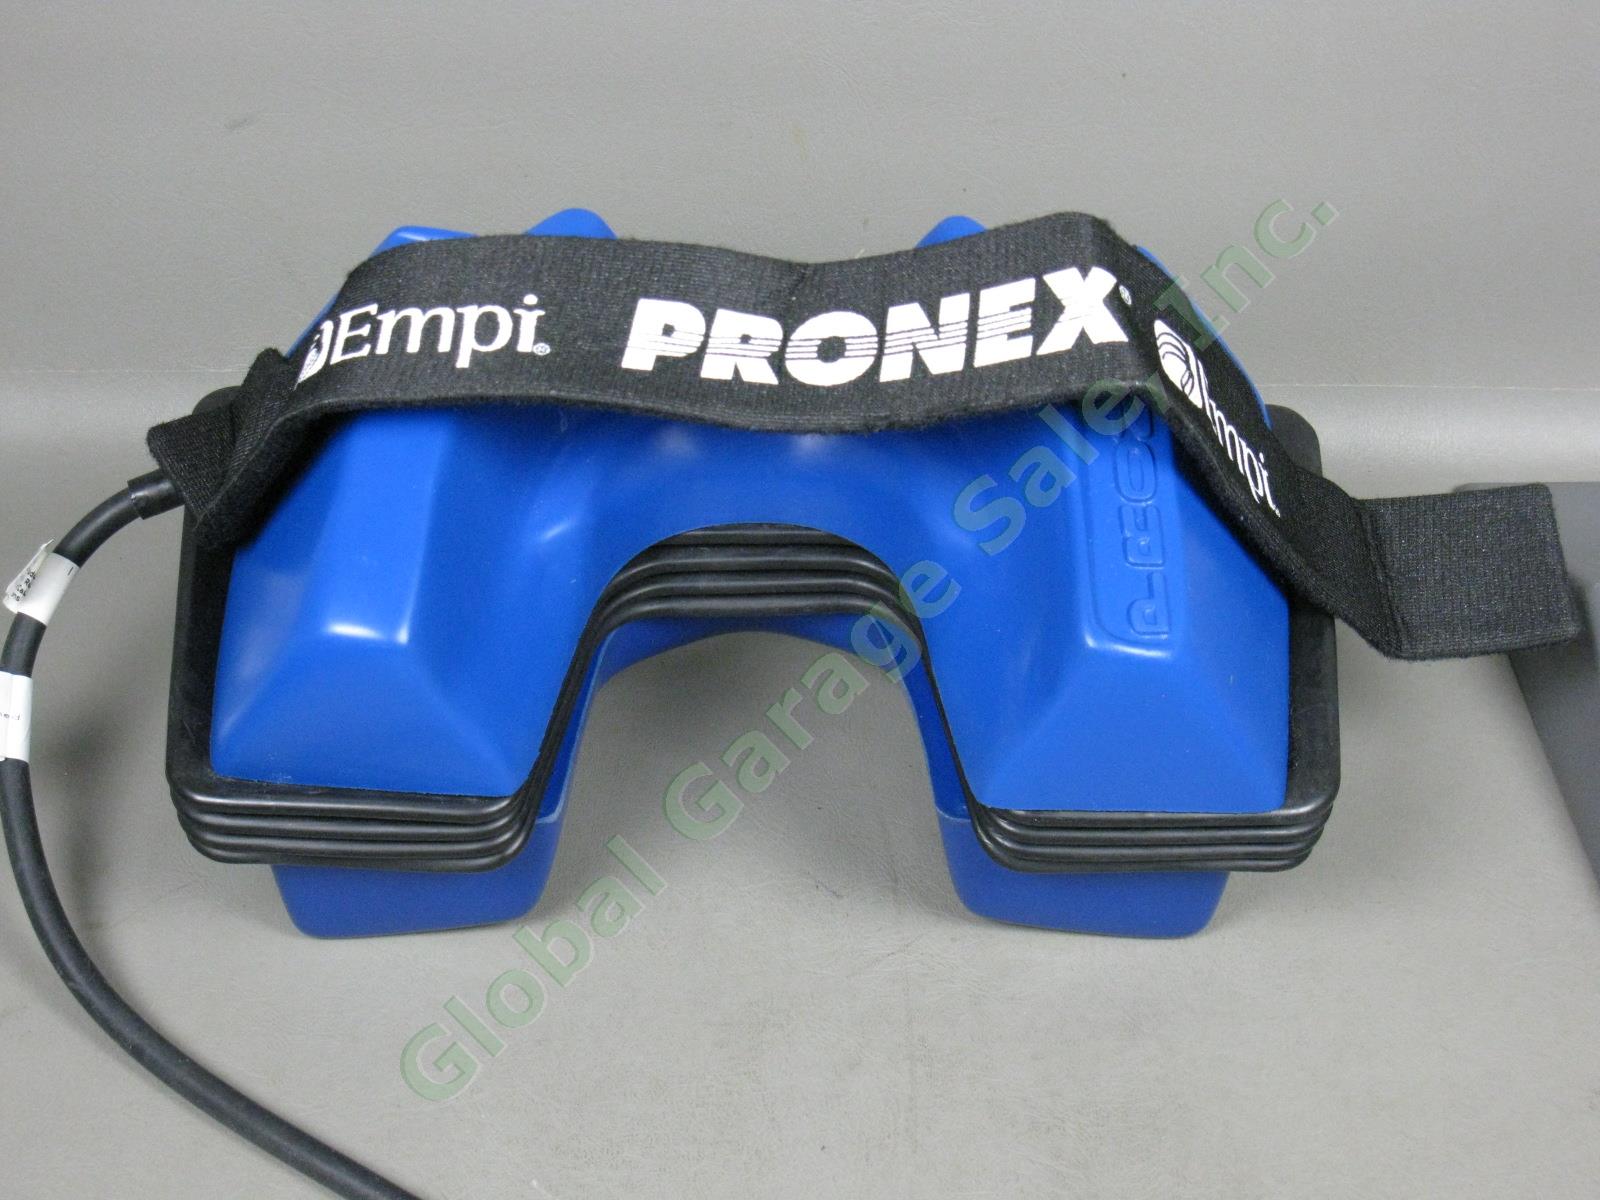 Empi Pronex Pneumatic Cervical Traction System Neck Therapy Regular Size 14"-18" 1